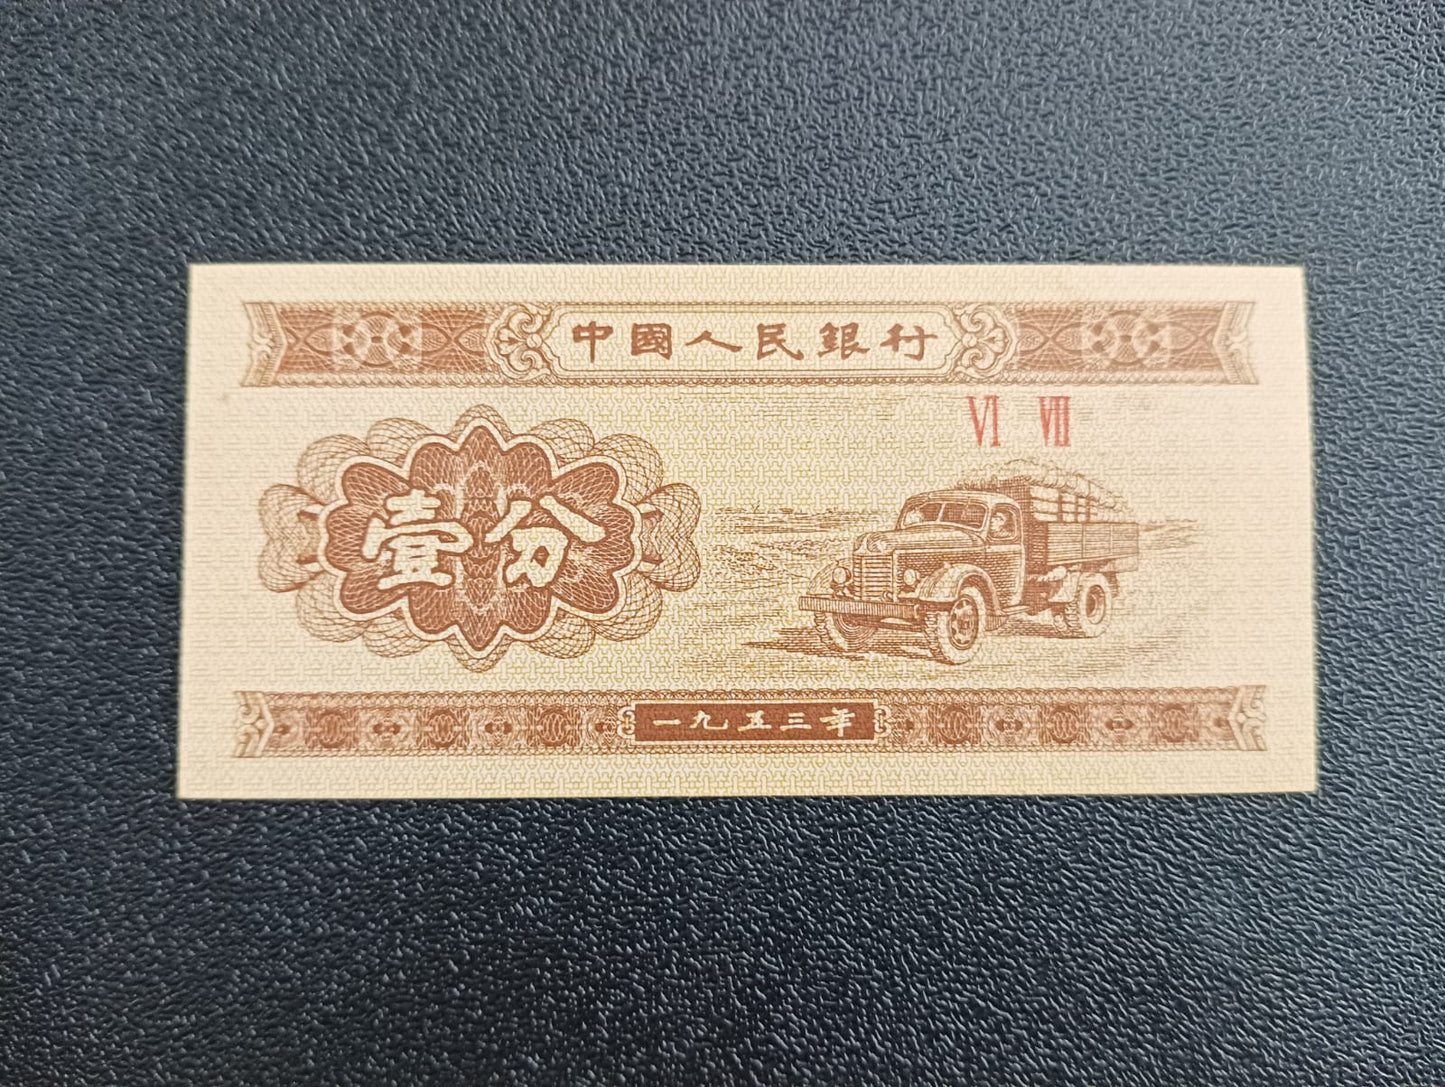 1 Fen 1953 UNC - China Old Issue